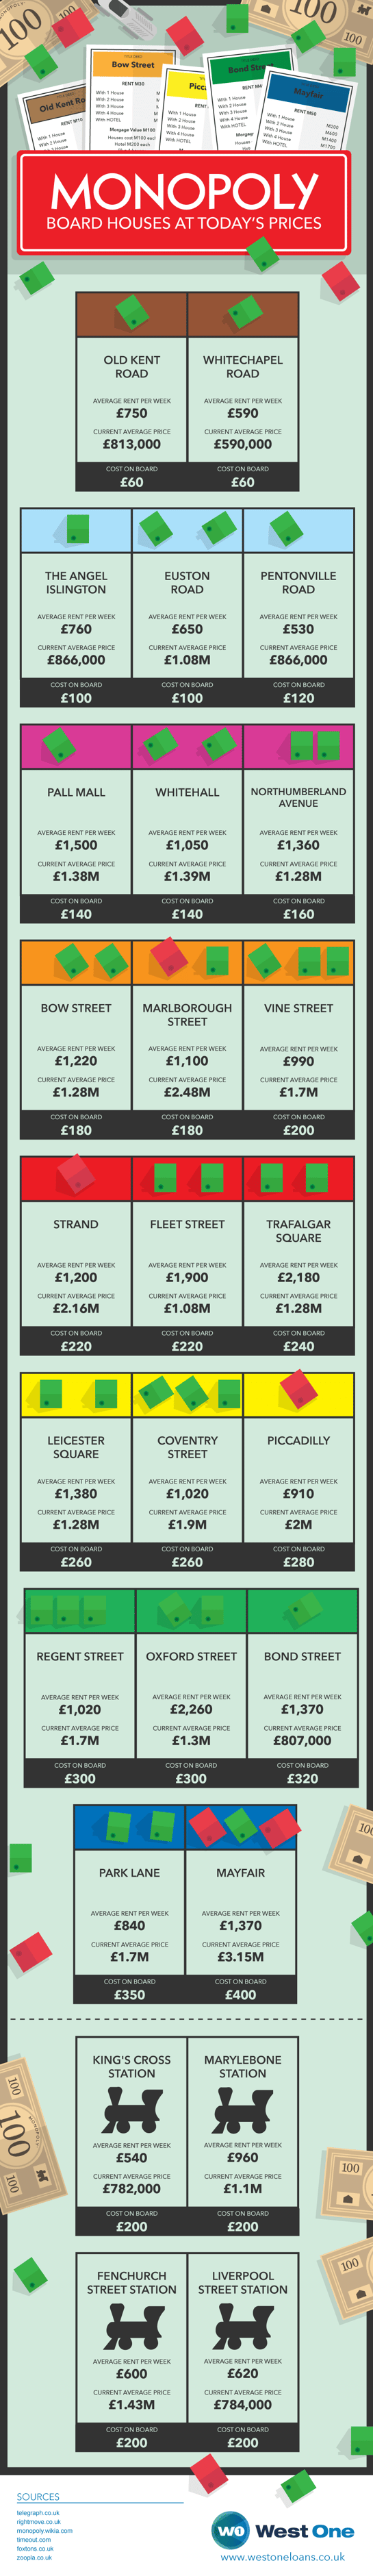 Monopoly-board-prices-v2.png